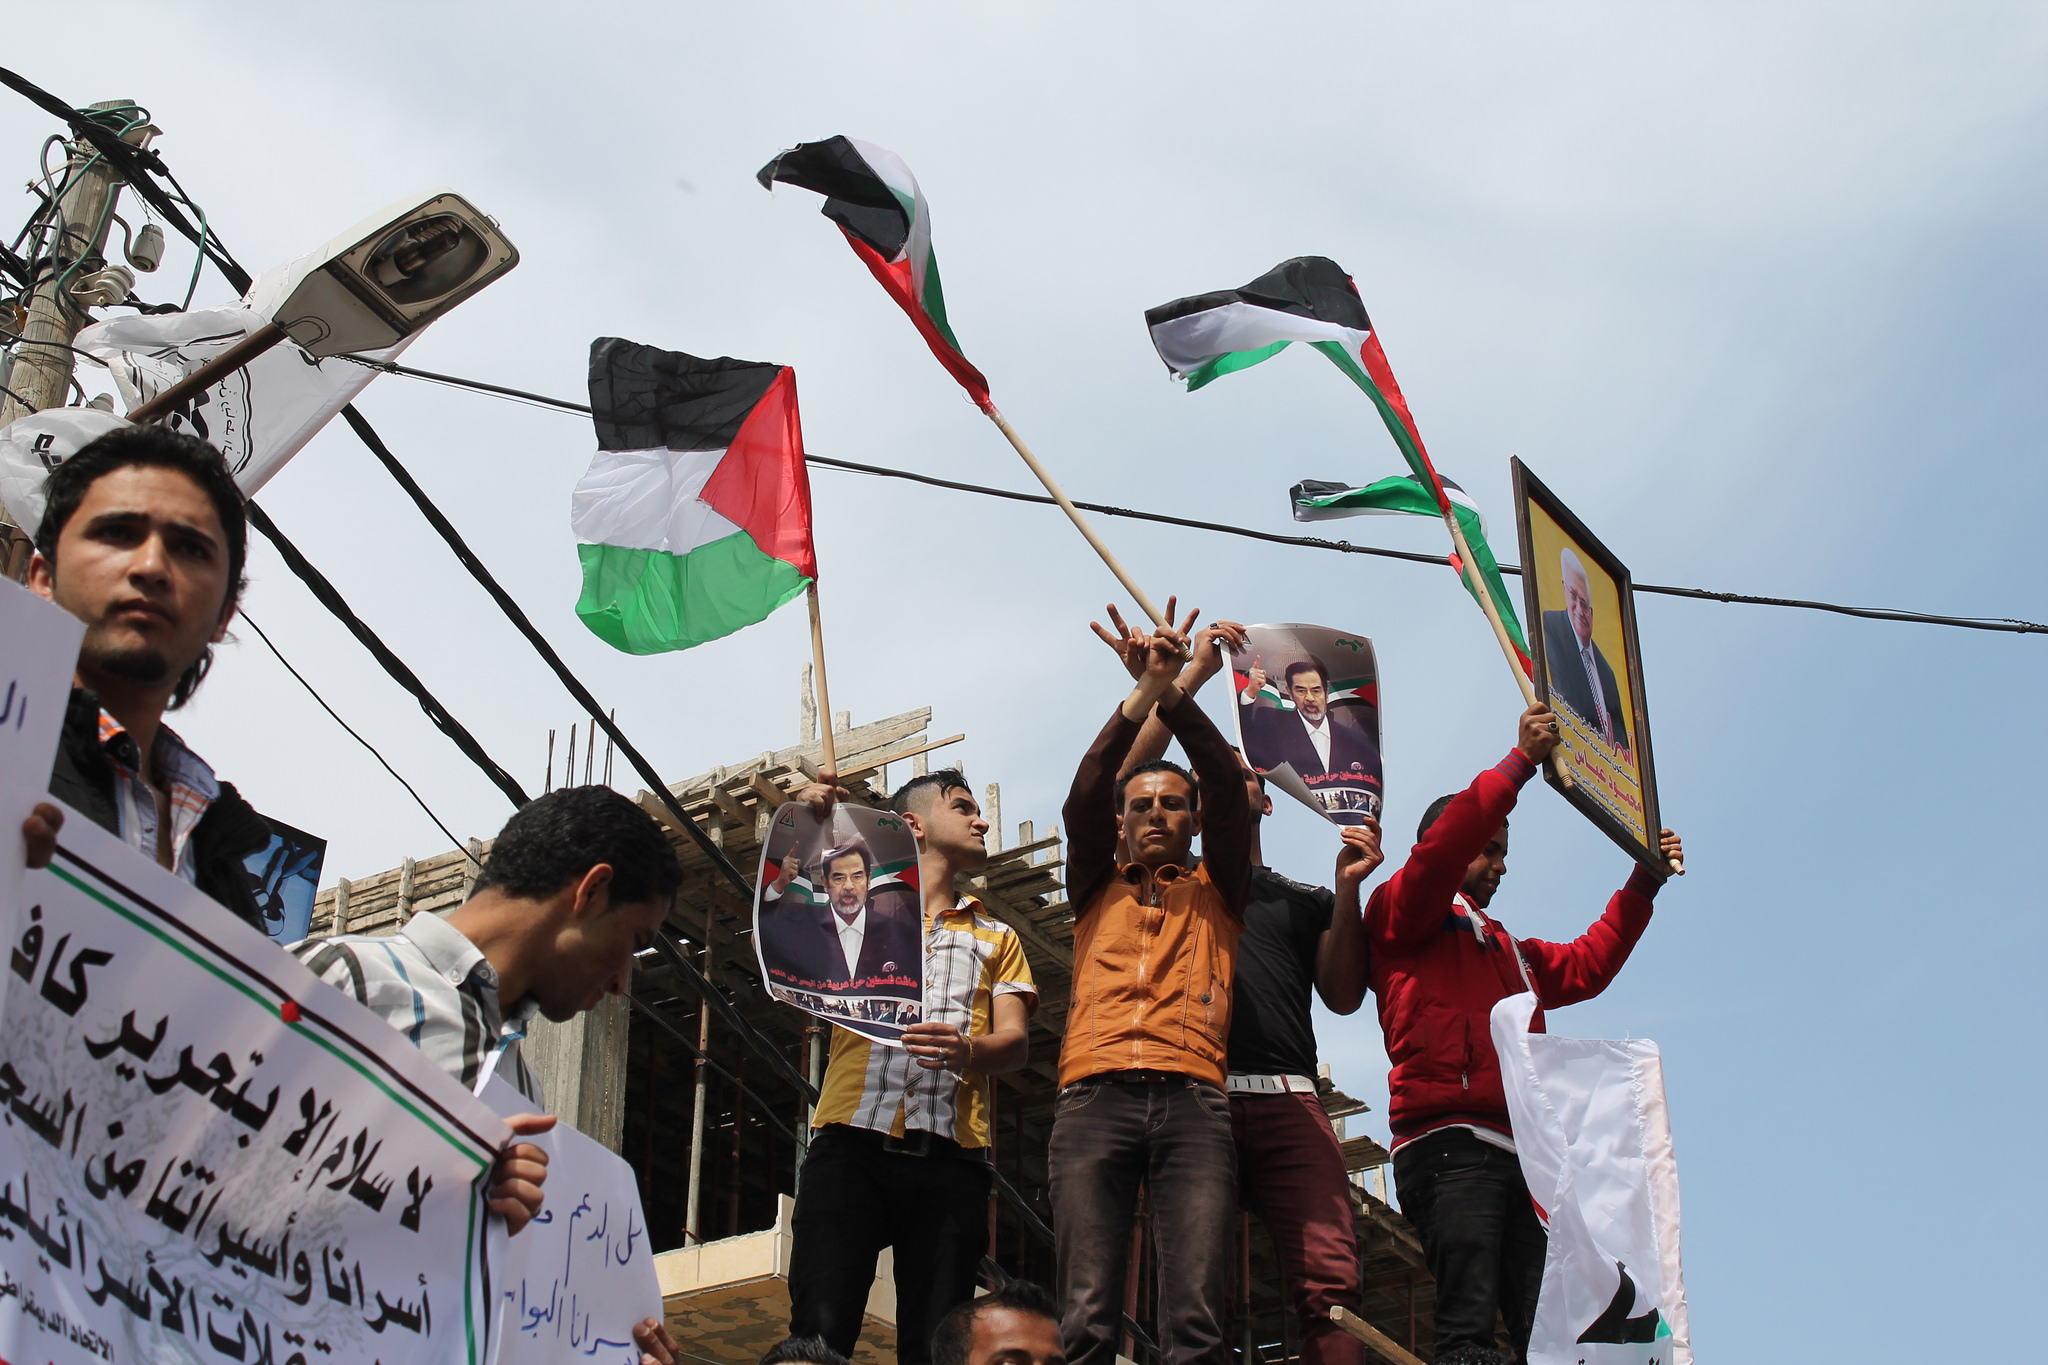 Palestinian Arab Front holds Gaza rally after weekly sit-in for Palestinian prisoners © Joe Catron